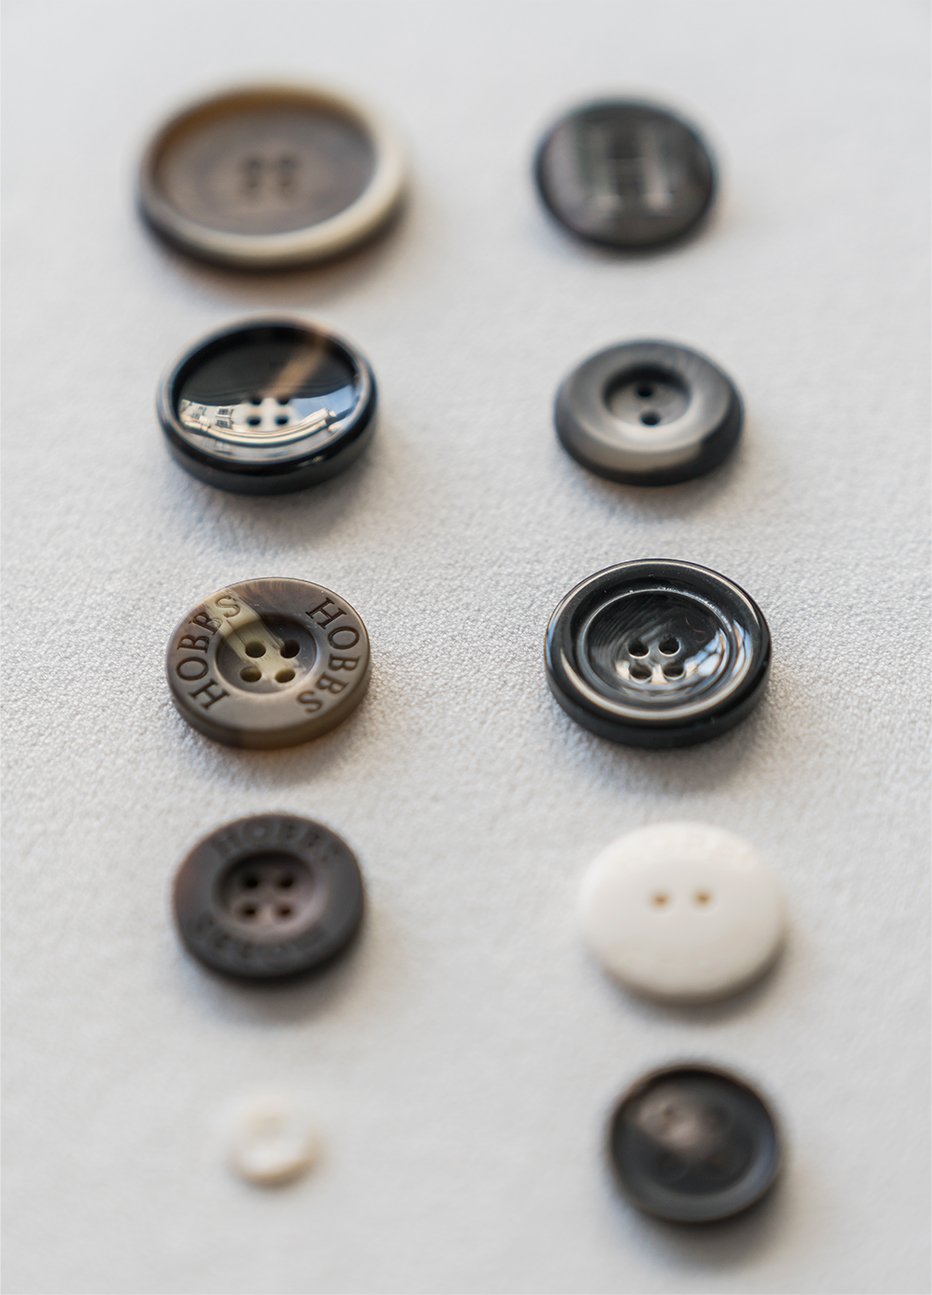 Two rows of buttons used for garments.